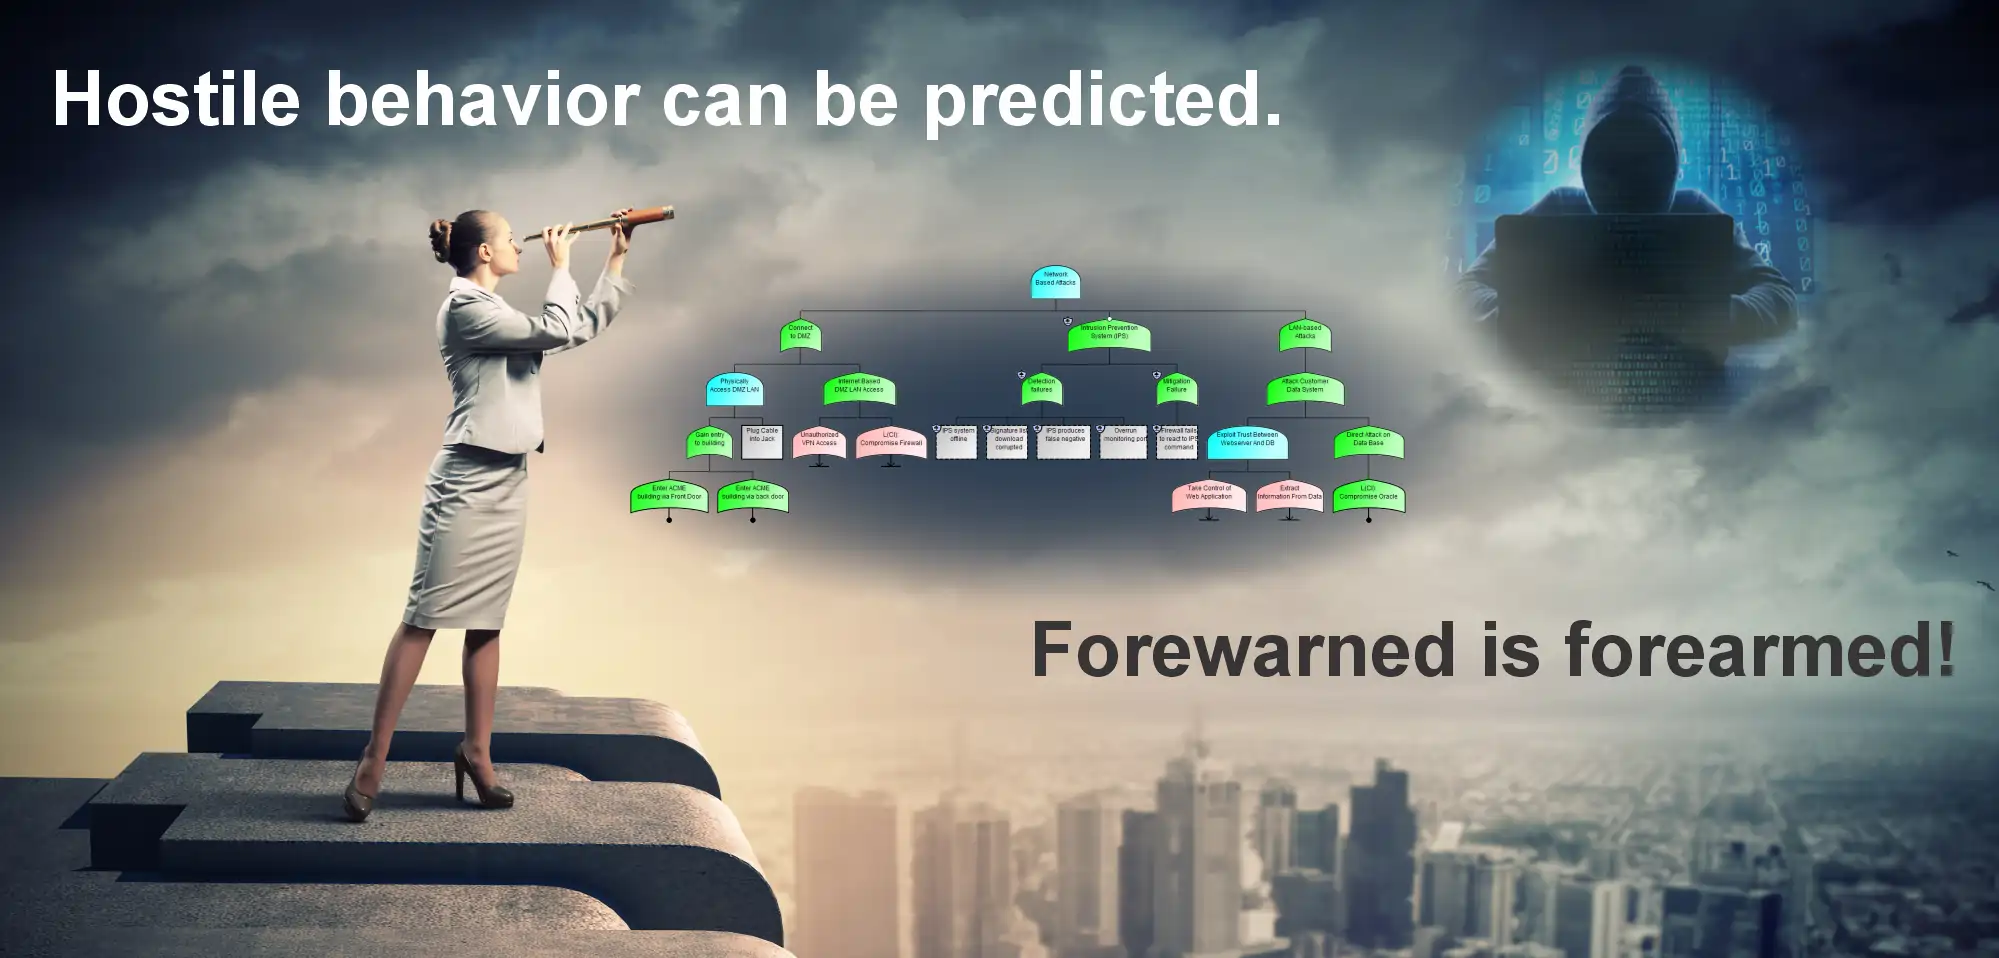 Hostile behavior can be predicted. Forewarned is forearmed!
        Use Amenaza's SecurITree software for predictive analytical modeling